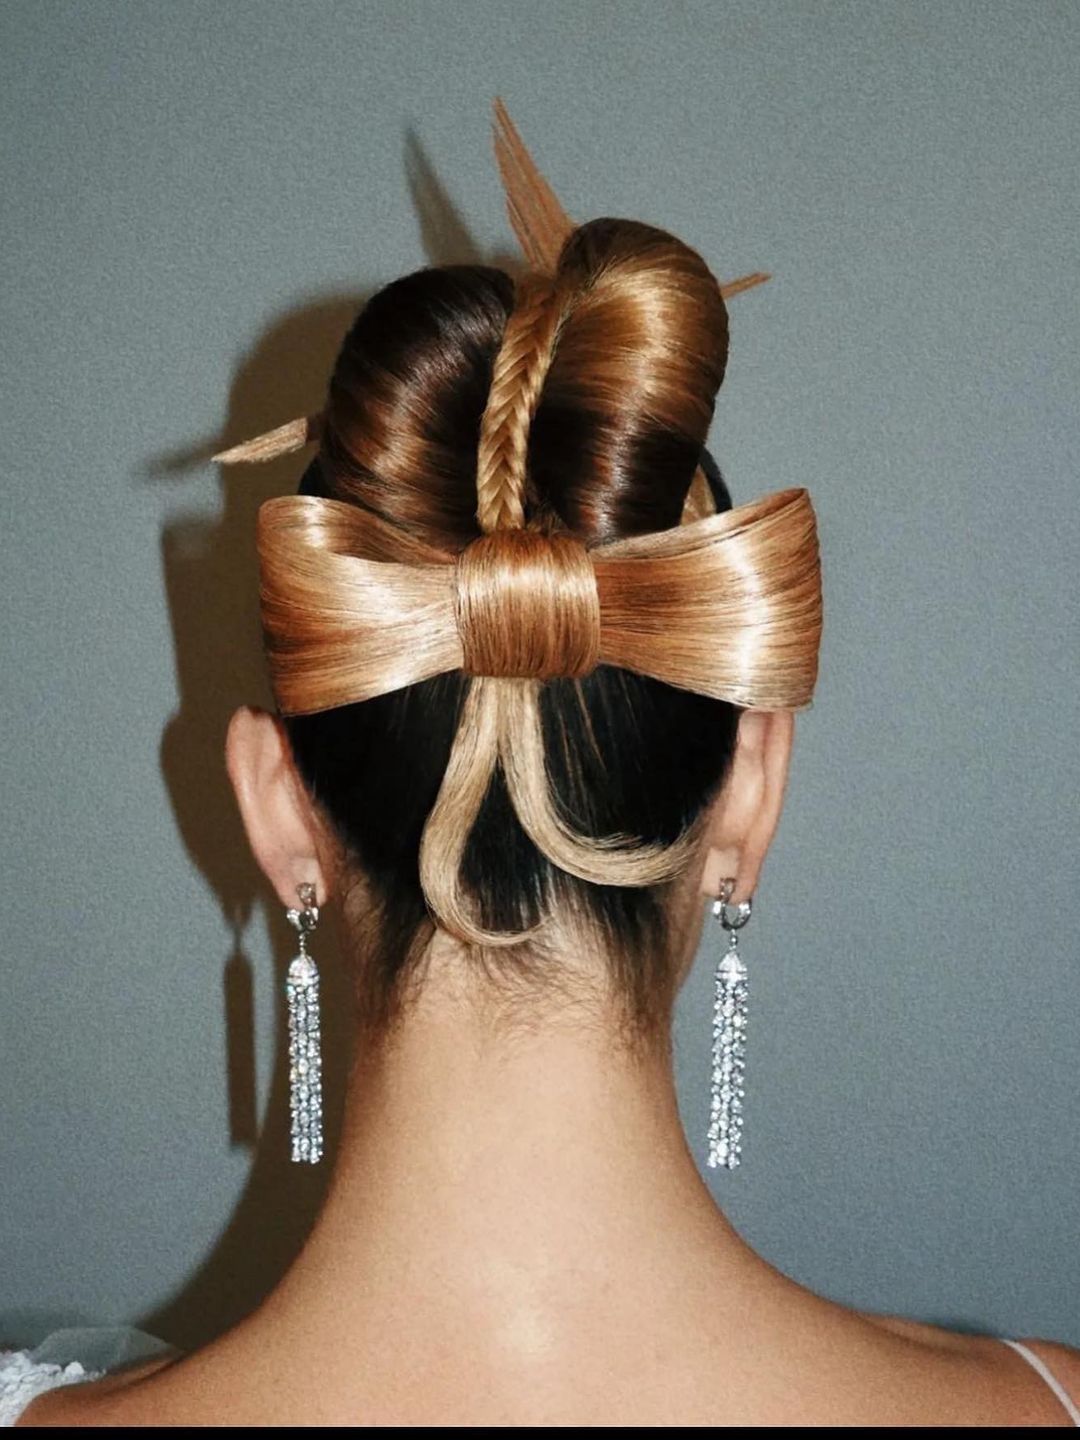 Lily James shares a picture of the back of her hair in a bow updo